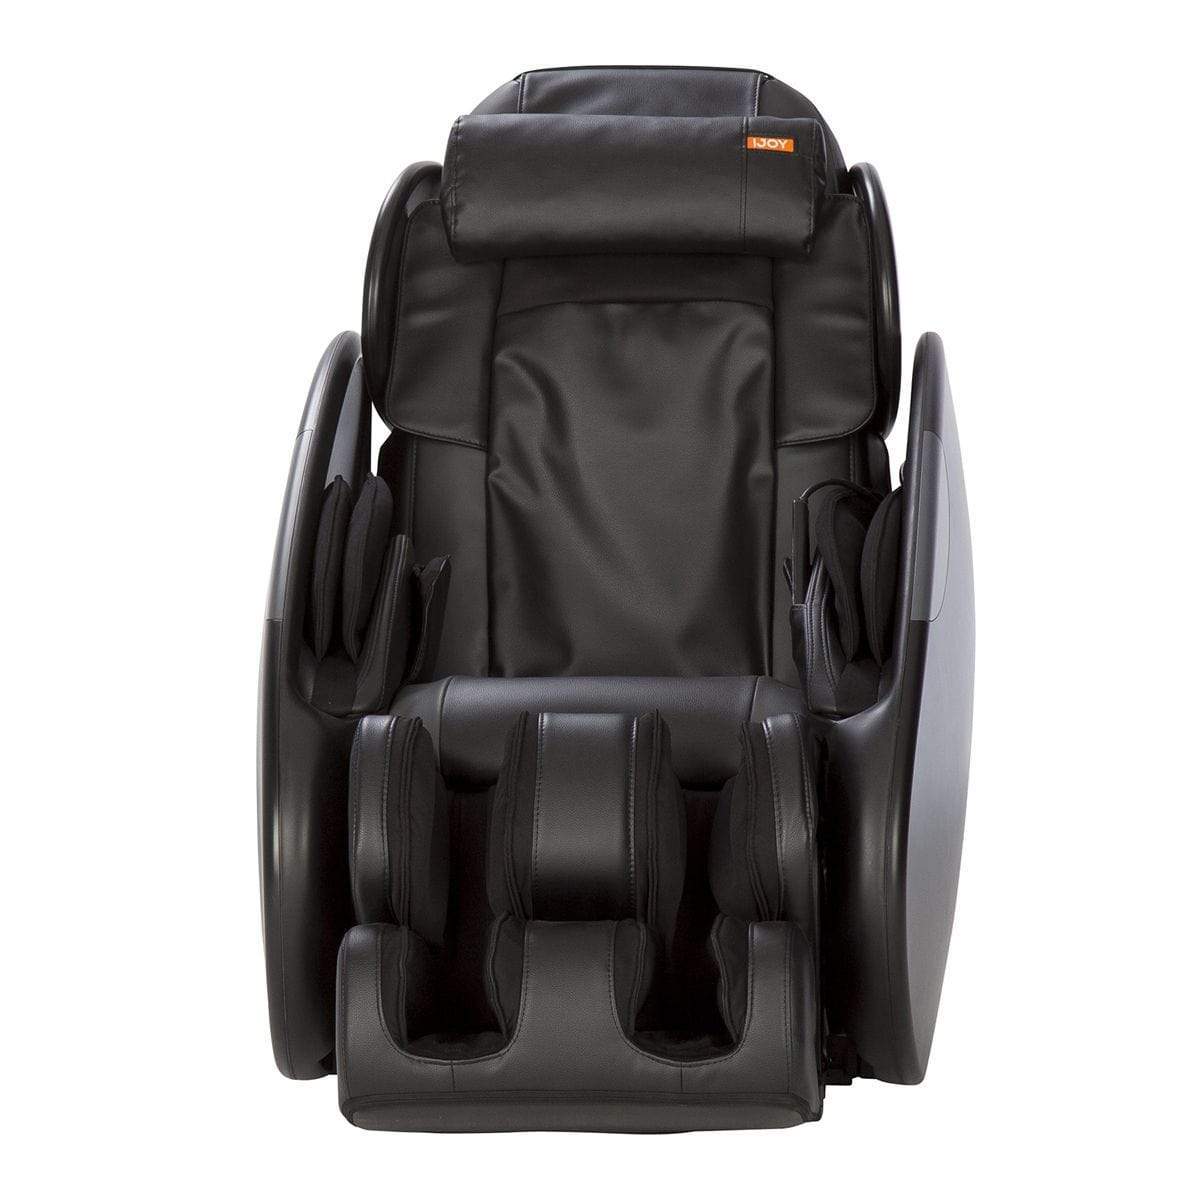 Human TouchMassage ChairHuman Touch iJoy Total Massage ChairExpressoMassage Chair Heaven